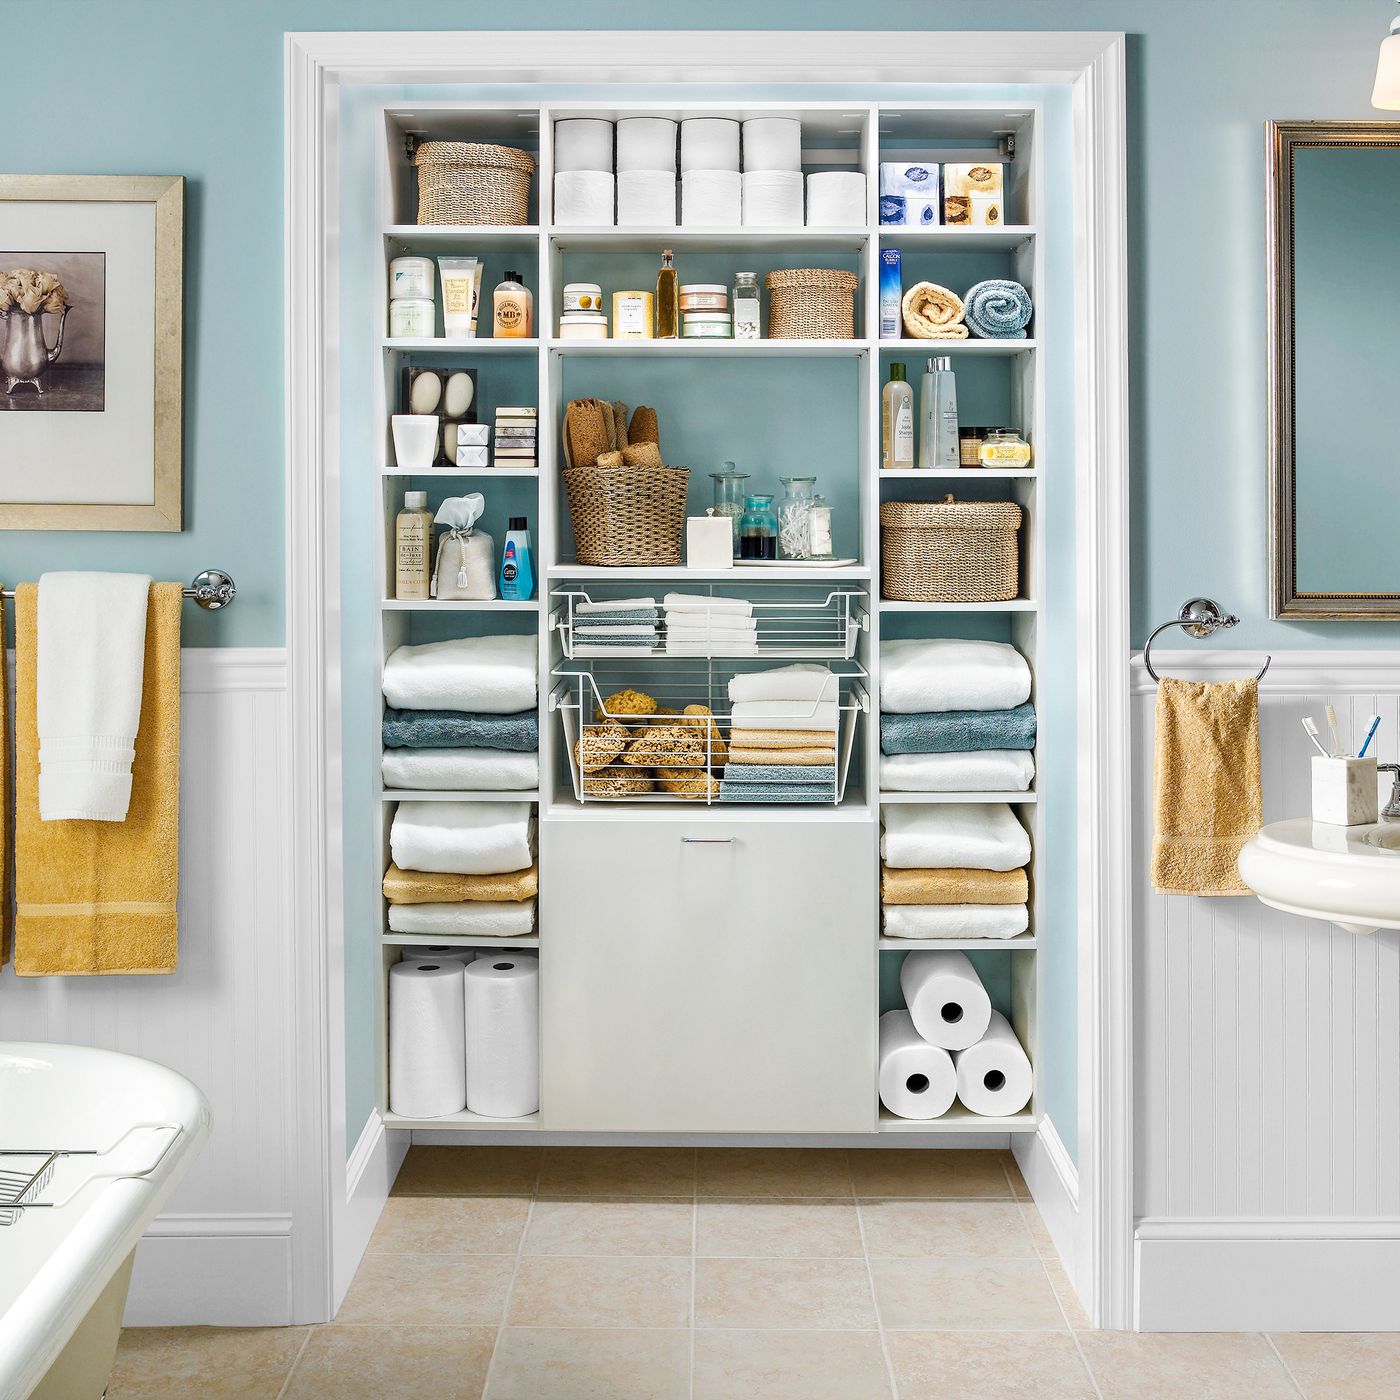 How to Choose and Buy on the Bulletin Board in Israel: Cabinets for Stylish Bathroom Storage.